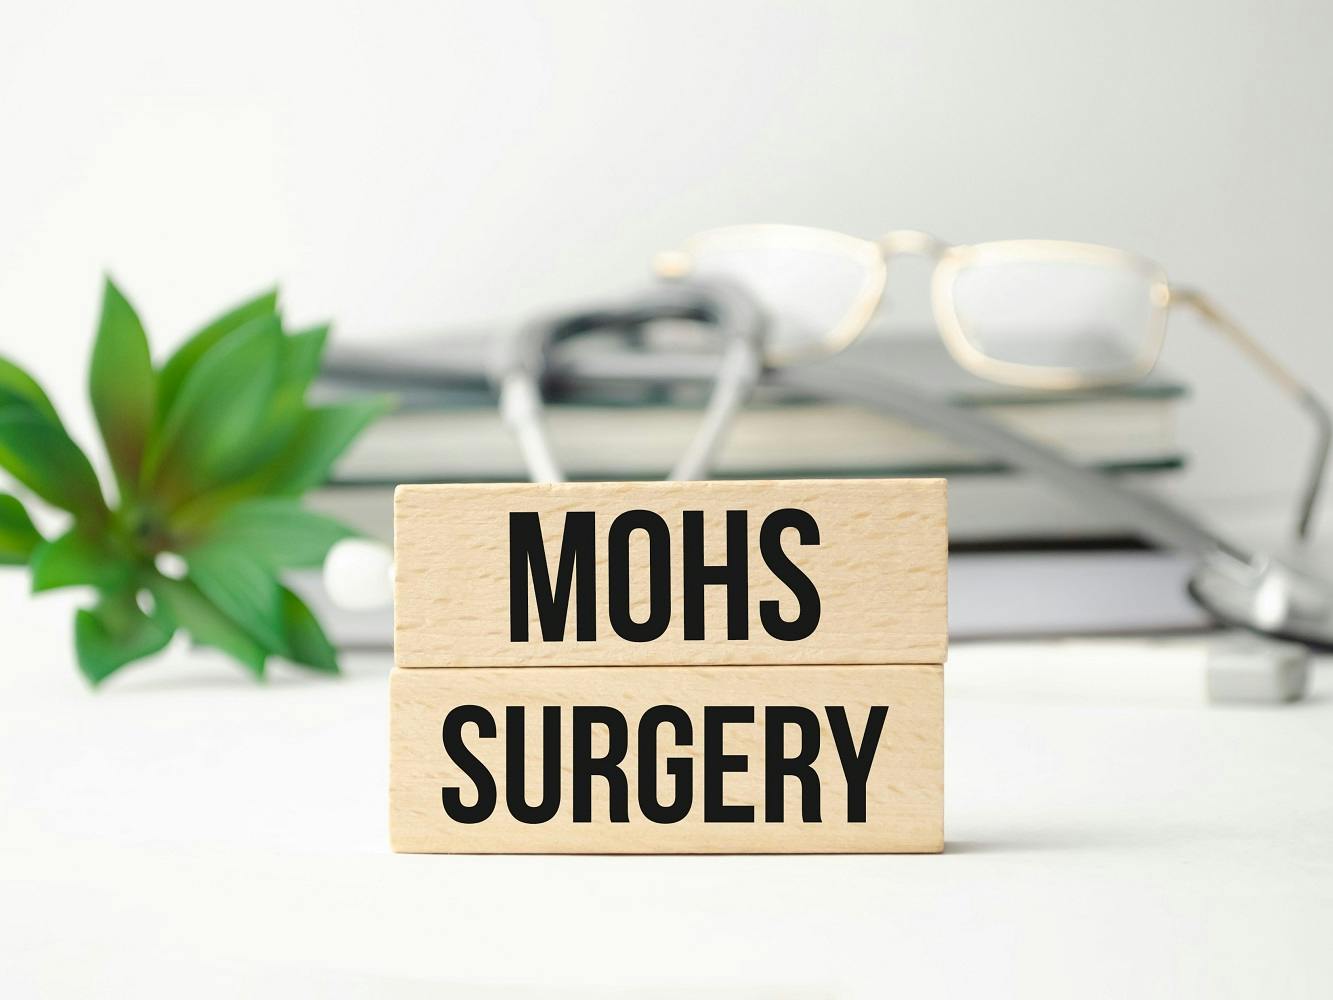 Does Medicare Cover Mohs Surgery?